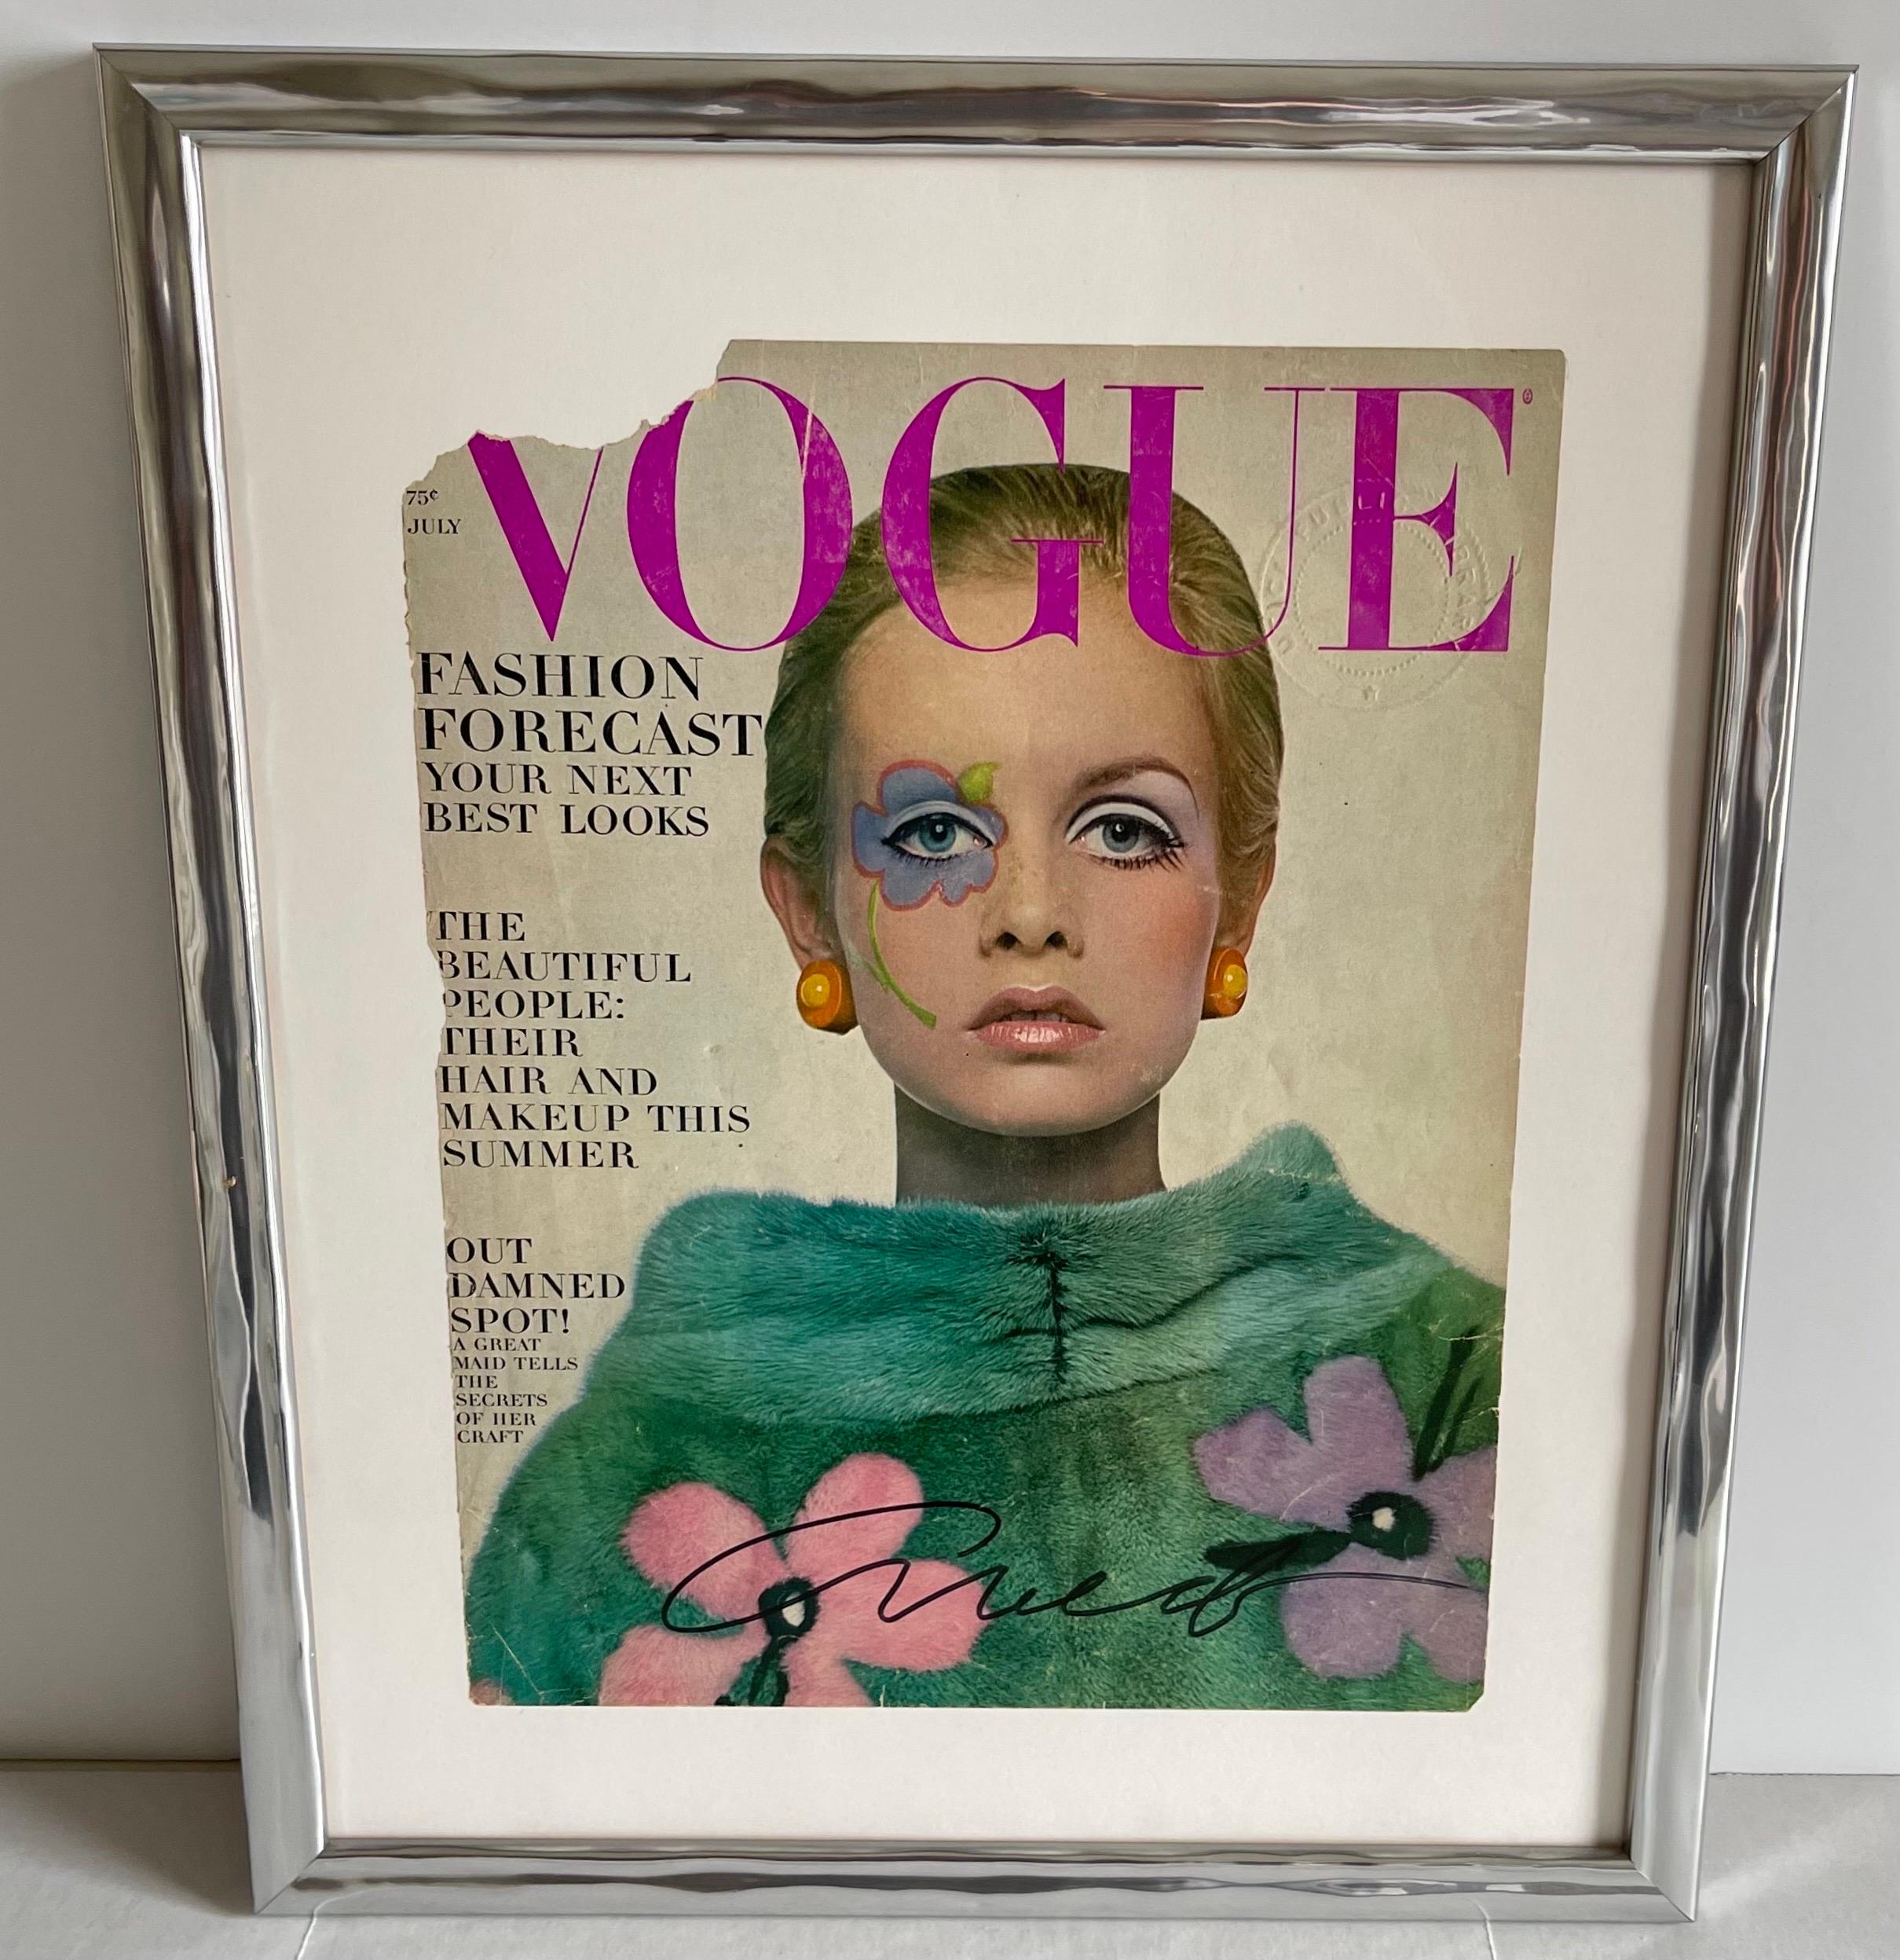 Vogue July 1967 Twiggy cover signed by Richard Avedon. Ex-Libris cover in original condition signed in black marker by Richard Avedon. Newly matted and framed in a silver carved wood frame.